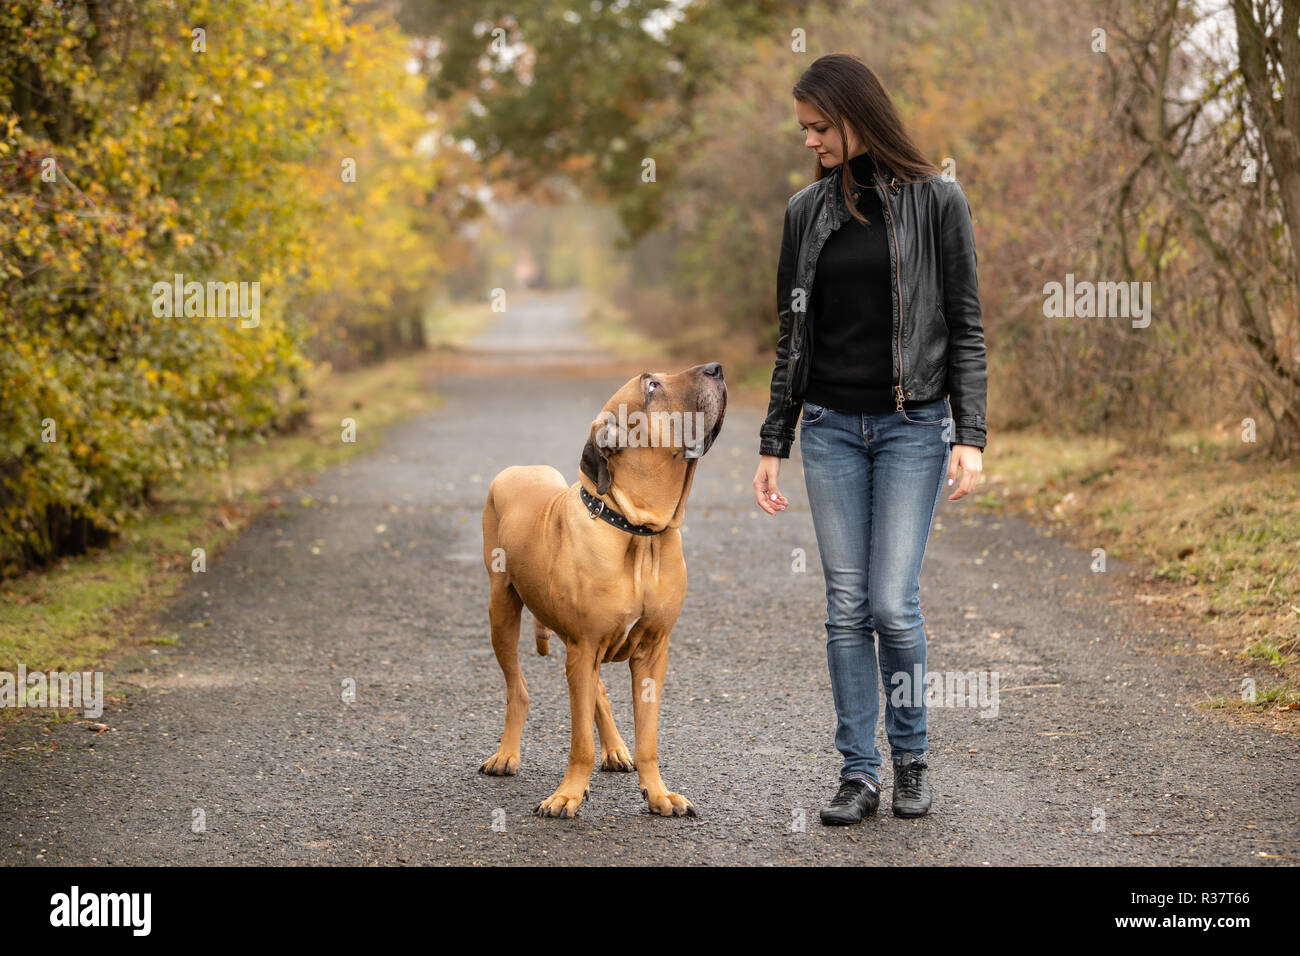 Stock photo of Domestic dog, Fila Brasileiro, outdoors. Available for sale  on